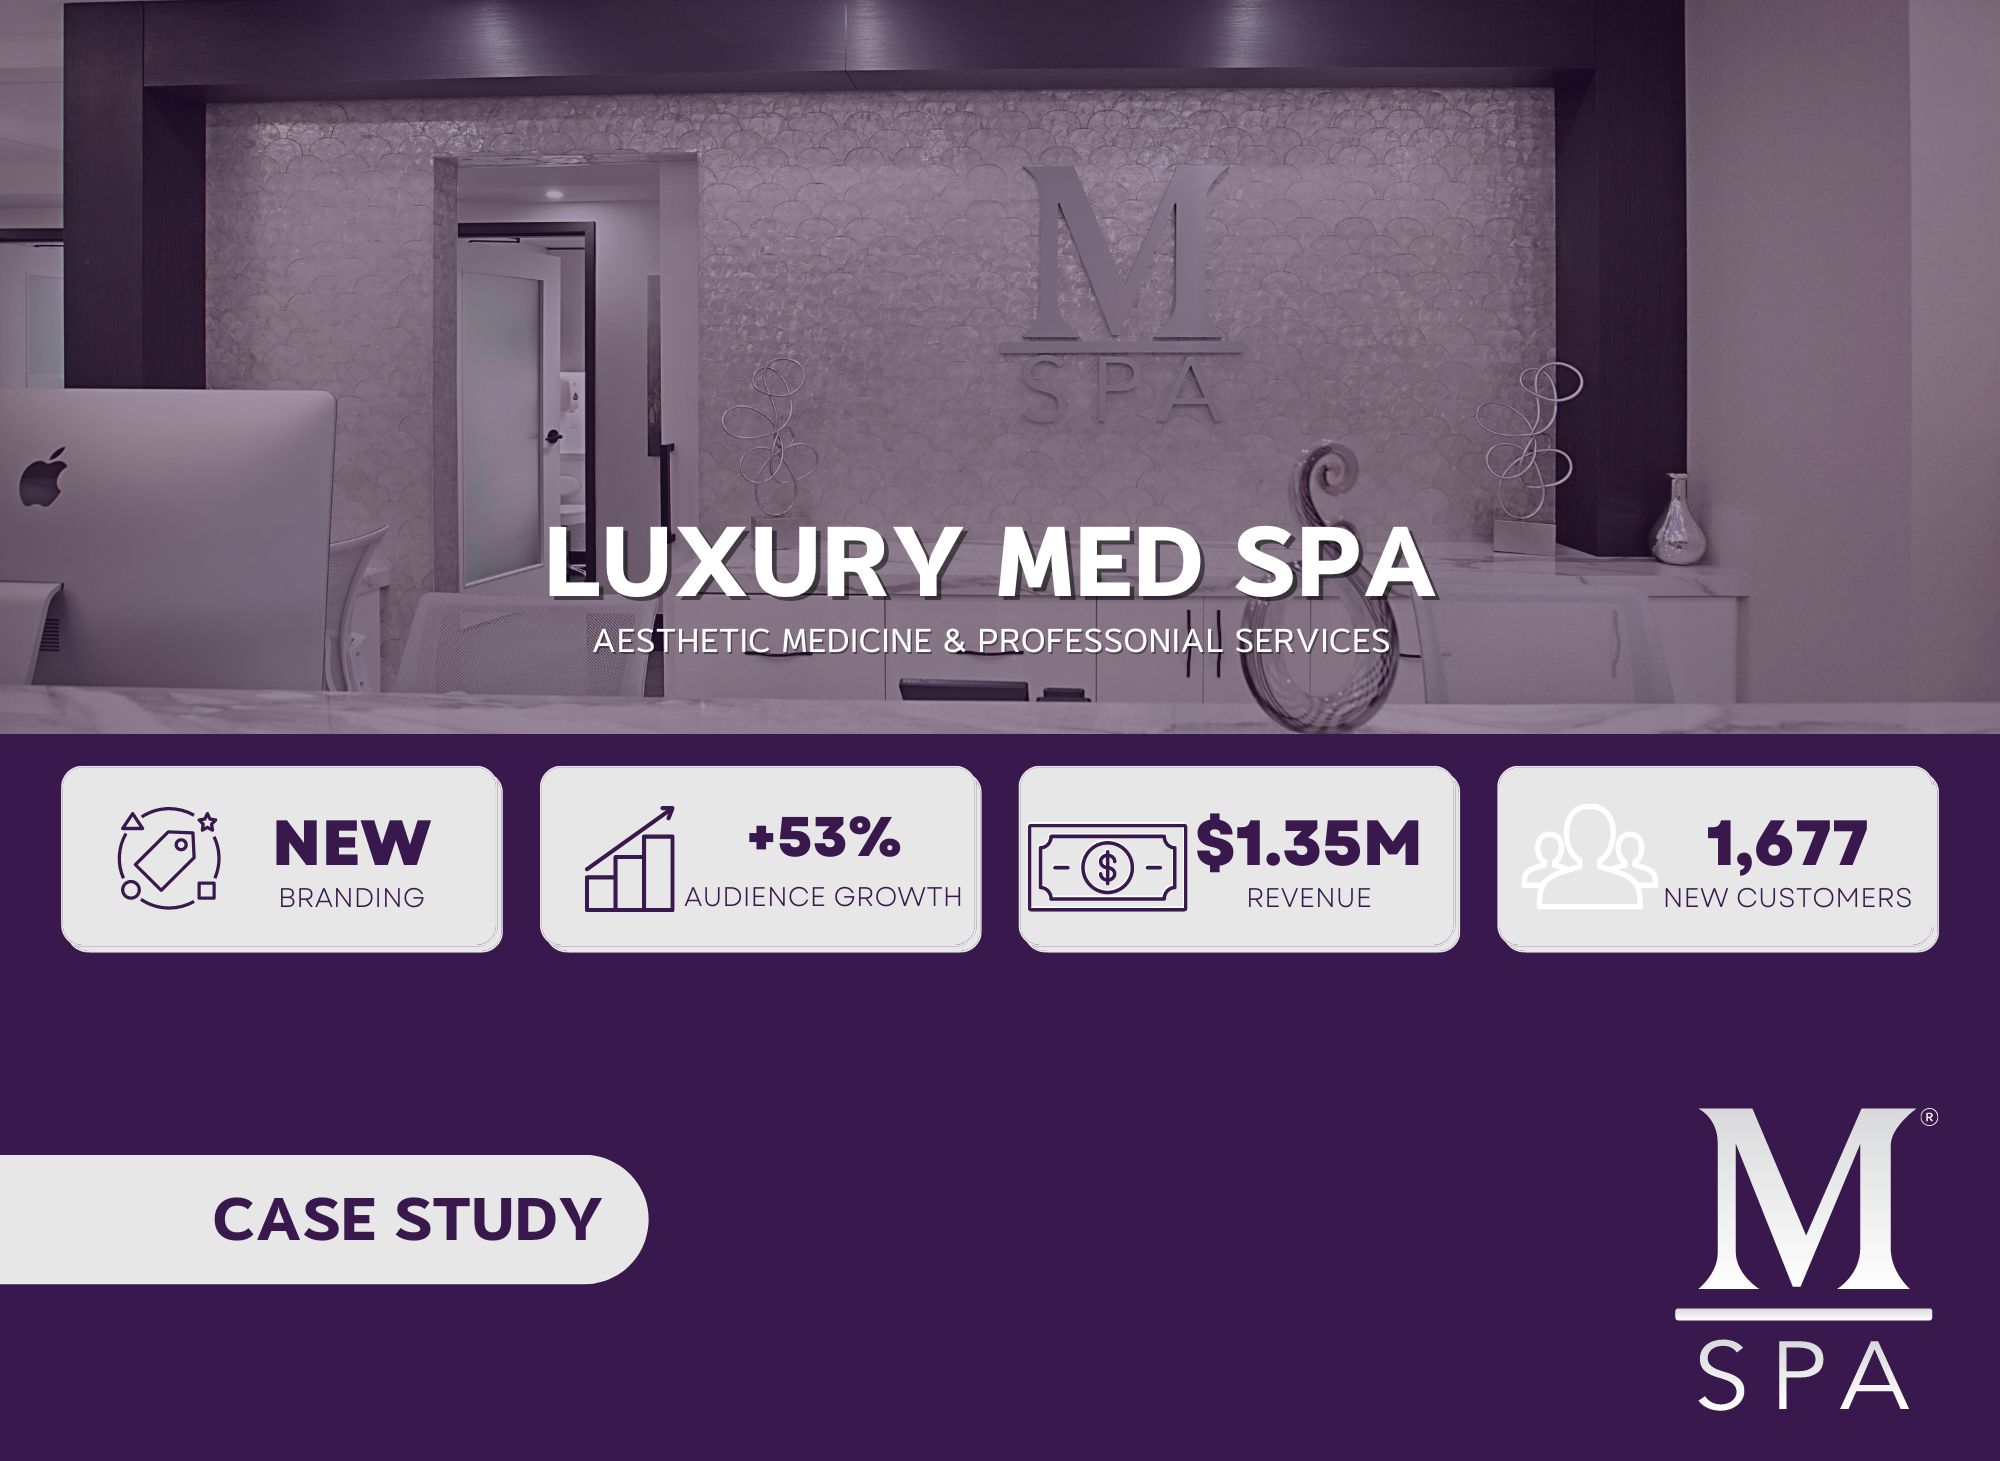 M Spa Case Study cover image that contains icons and infographs on a purple and gray background